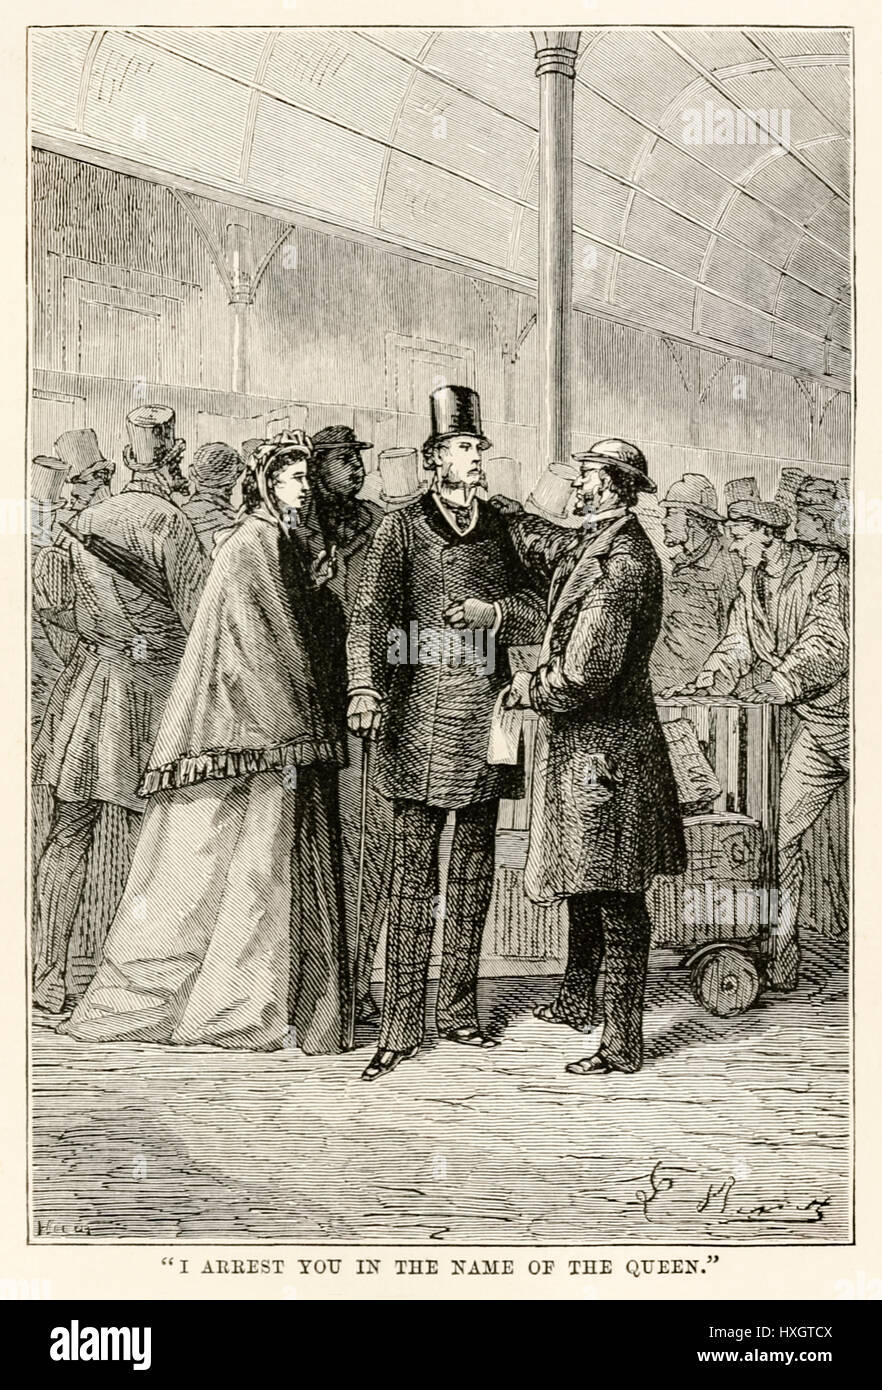 “I arrest you in the name of the Queen” from ‘Around the World in Eighty Days’ by Jules Verne (1828-1905) published in 1873 with illustrations by Alphonse-Marie-Adolphe de Neuville (1835-1885) and Léon Benett (1839-1917) and engravings by Louis Dumont (born 1822) and Adolphe François Pannemaker (1822-1900). Stock Photo